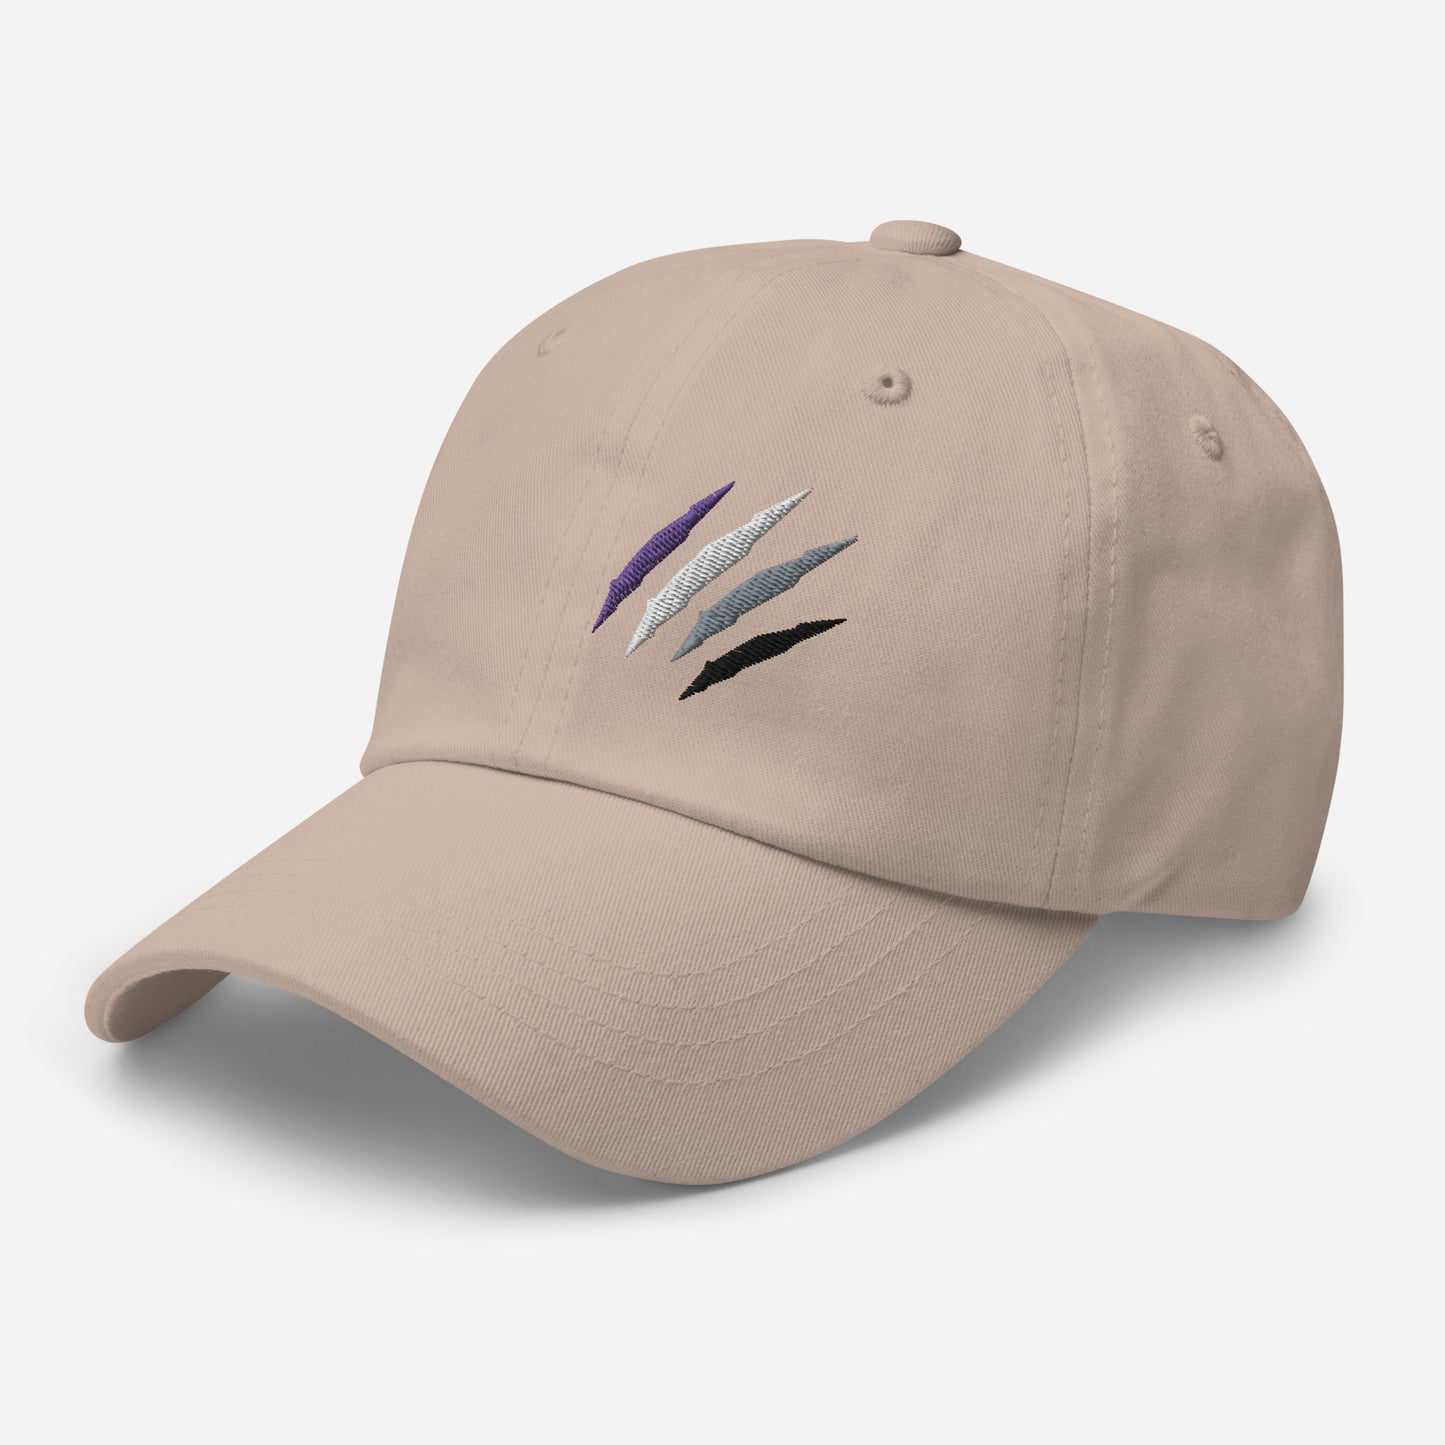 Baseball hat featuring asexual pride scratch mark embroidery in stone with a low profile, adjustable strap.